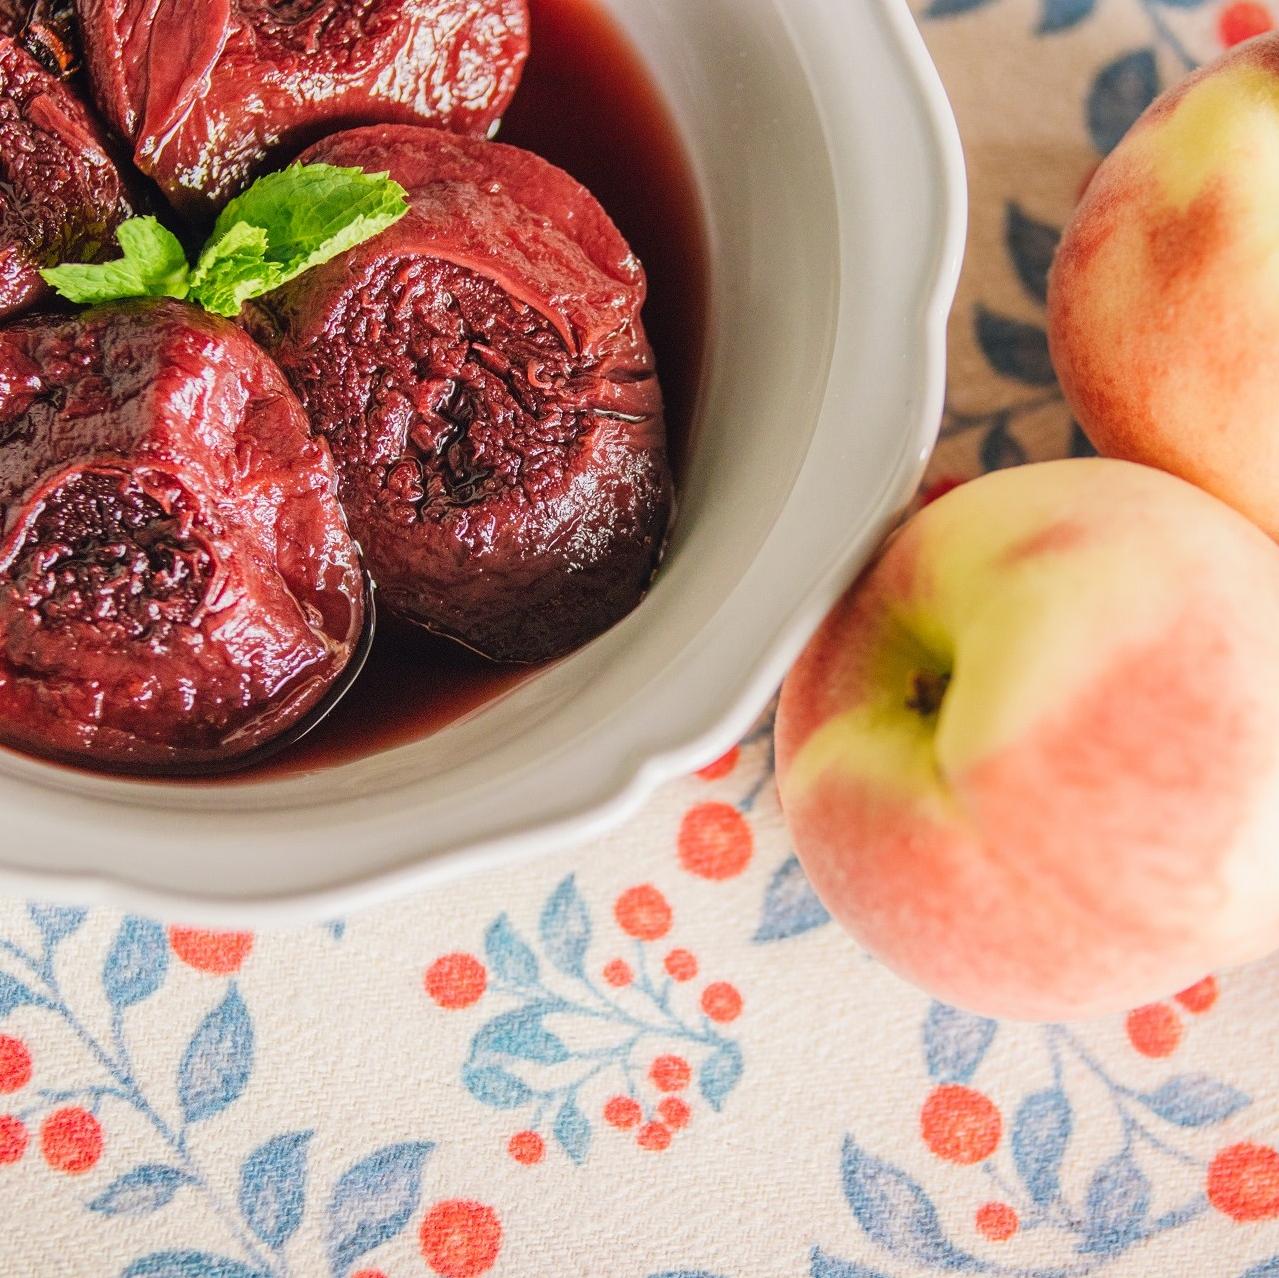  A match made in heaven: peaches and red wine.